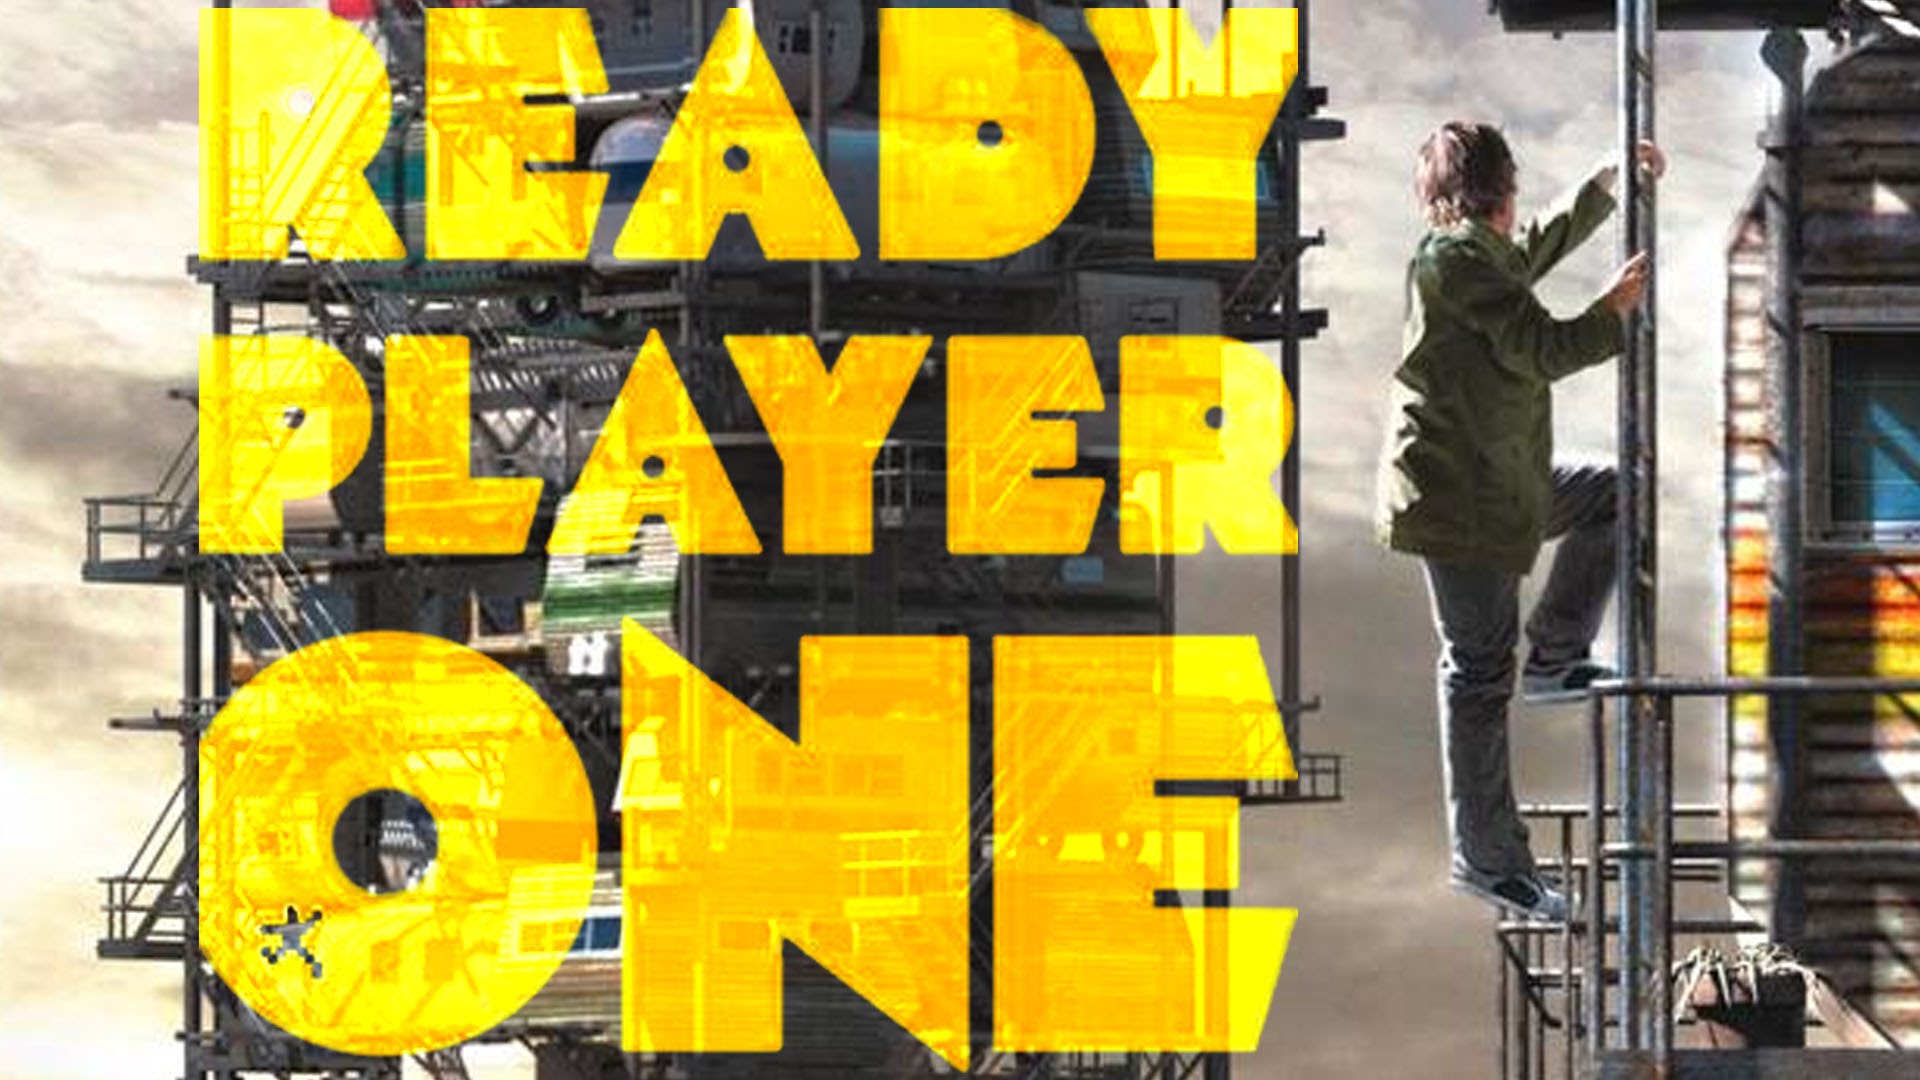 Steven Spielberg's Ready Player One movie review